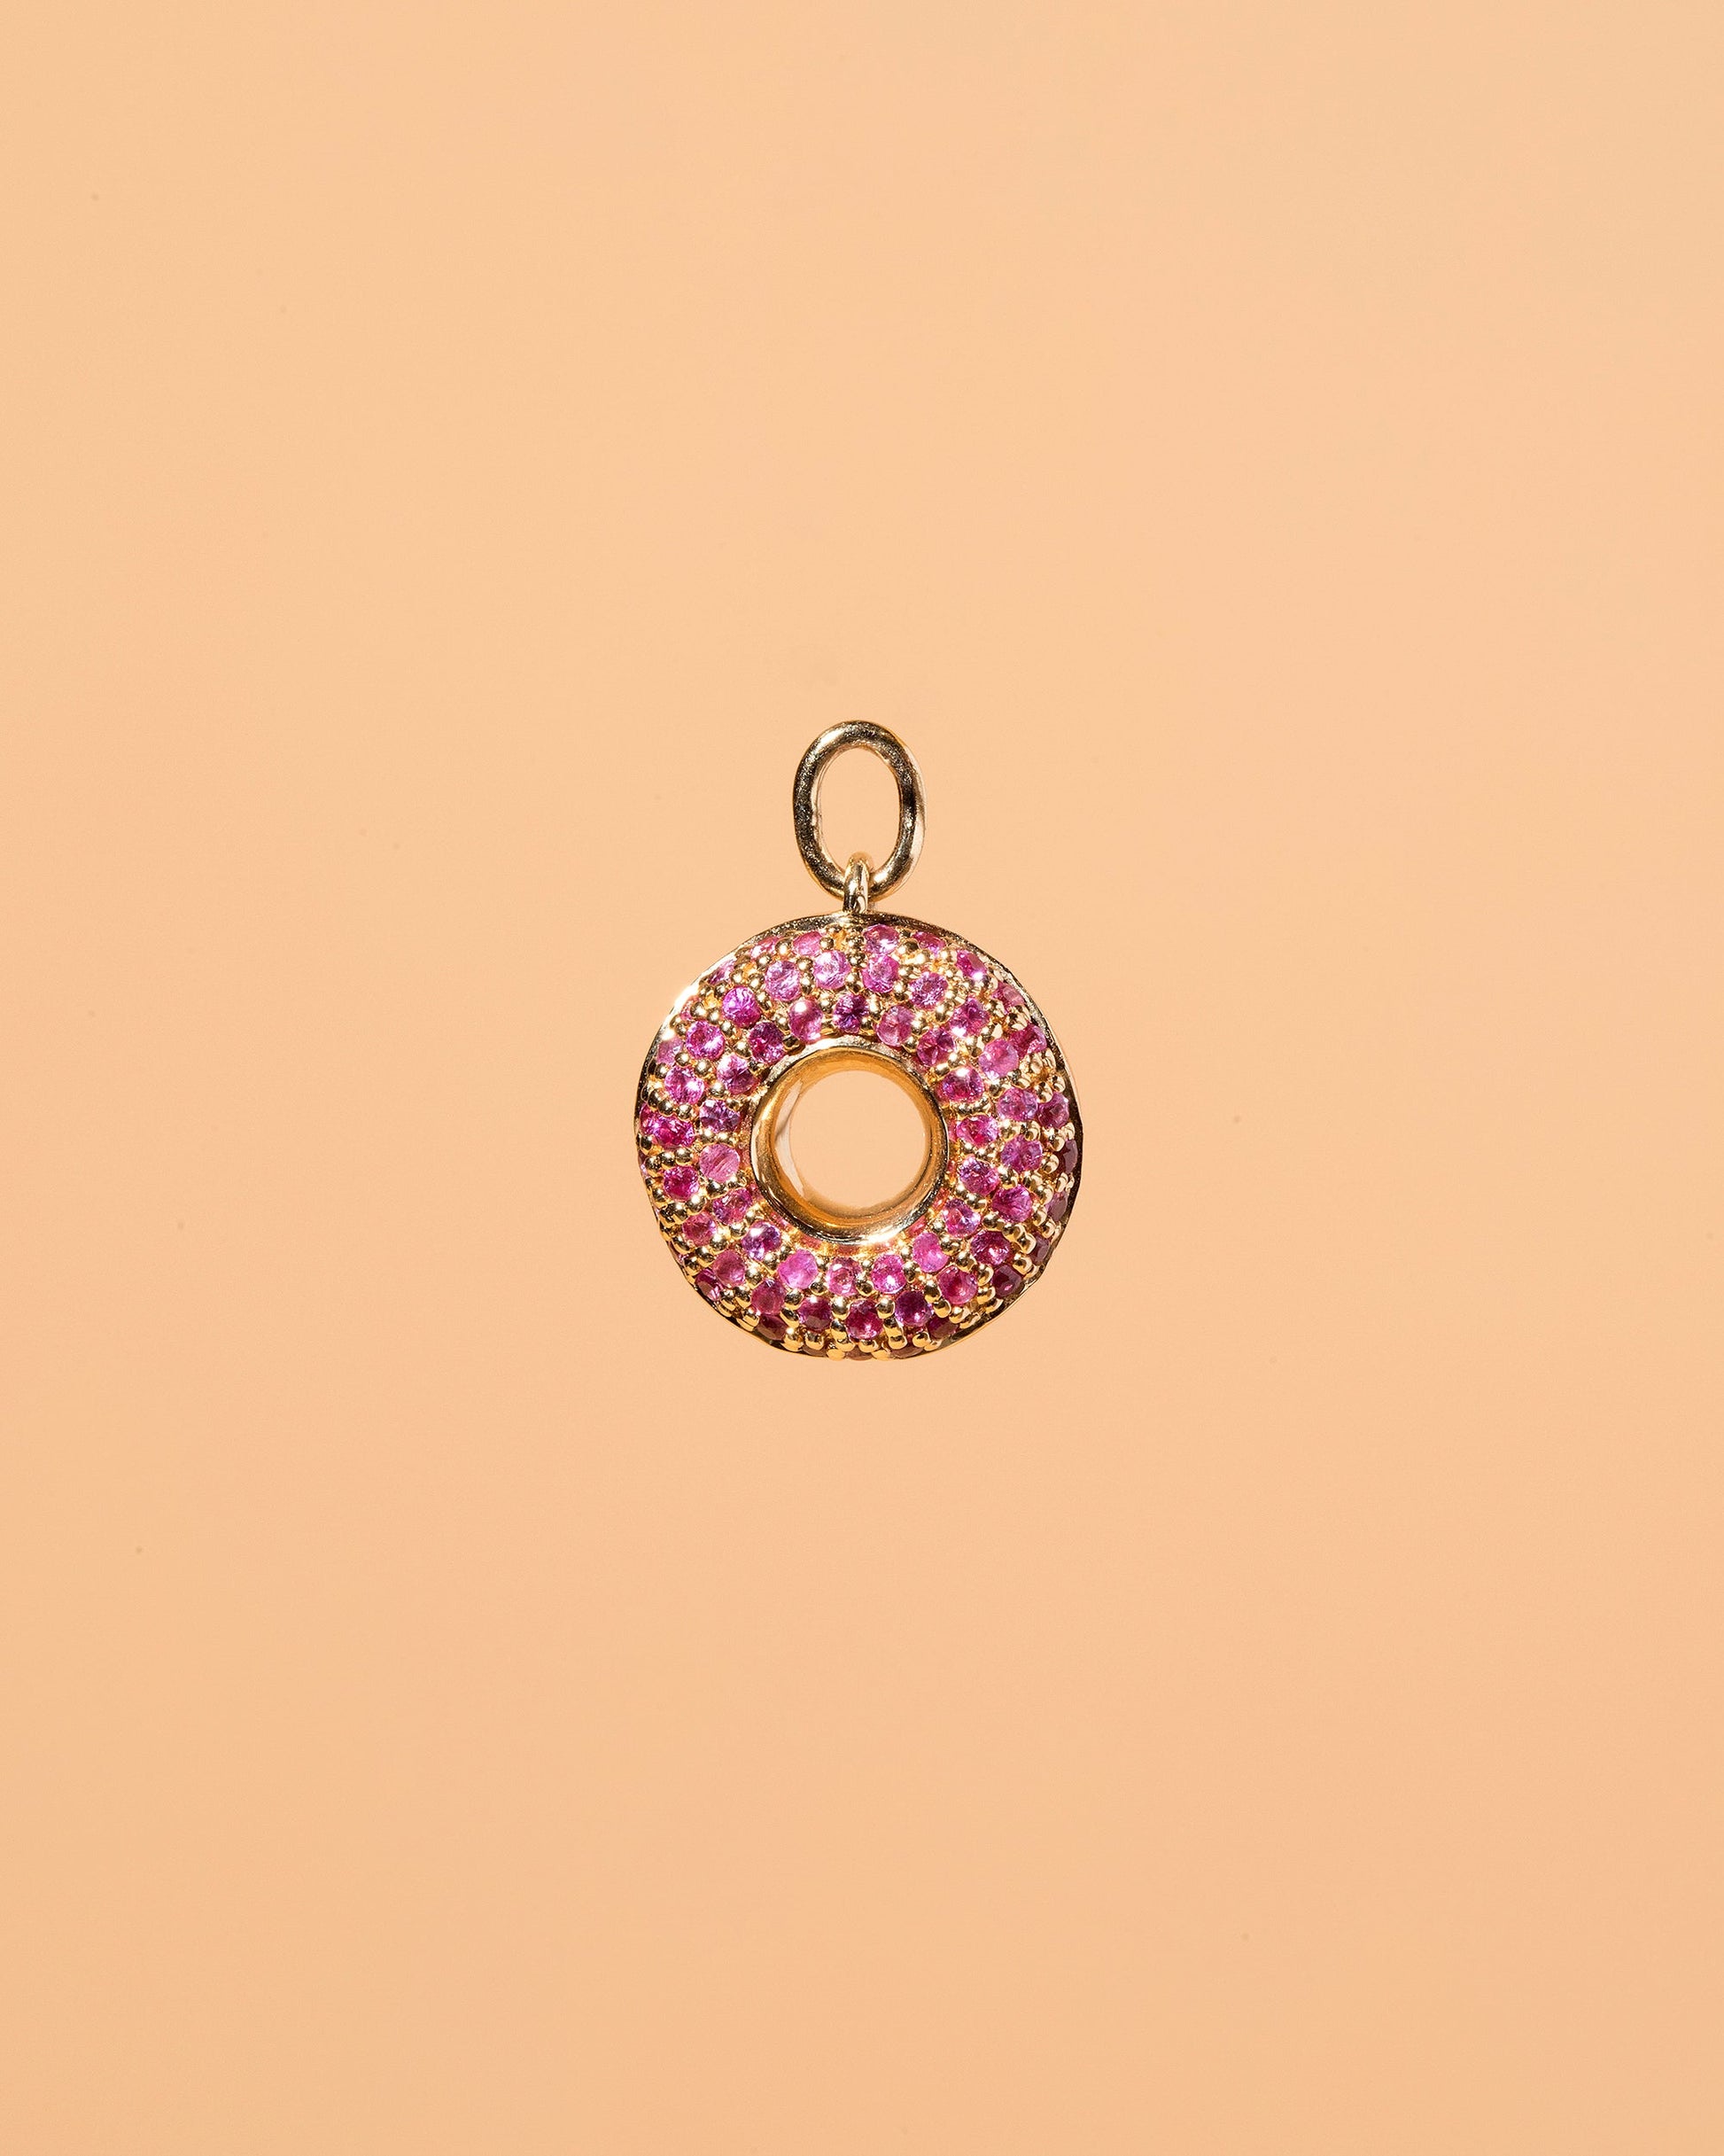  Strawberry Donut Charm on light color background.